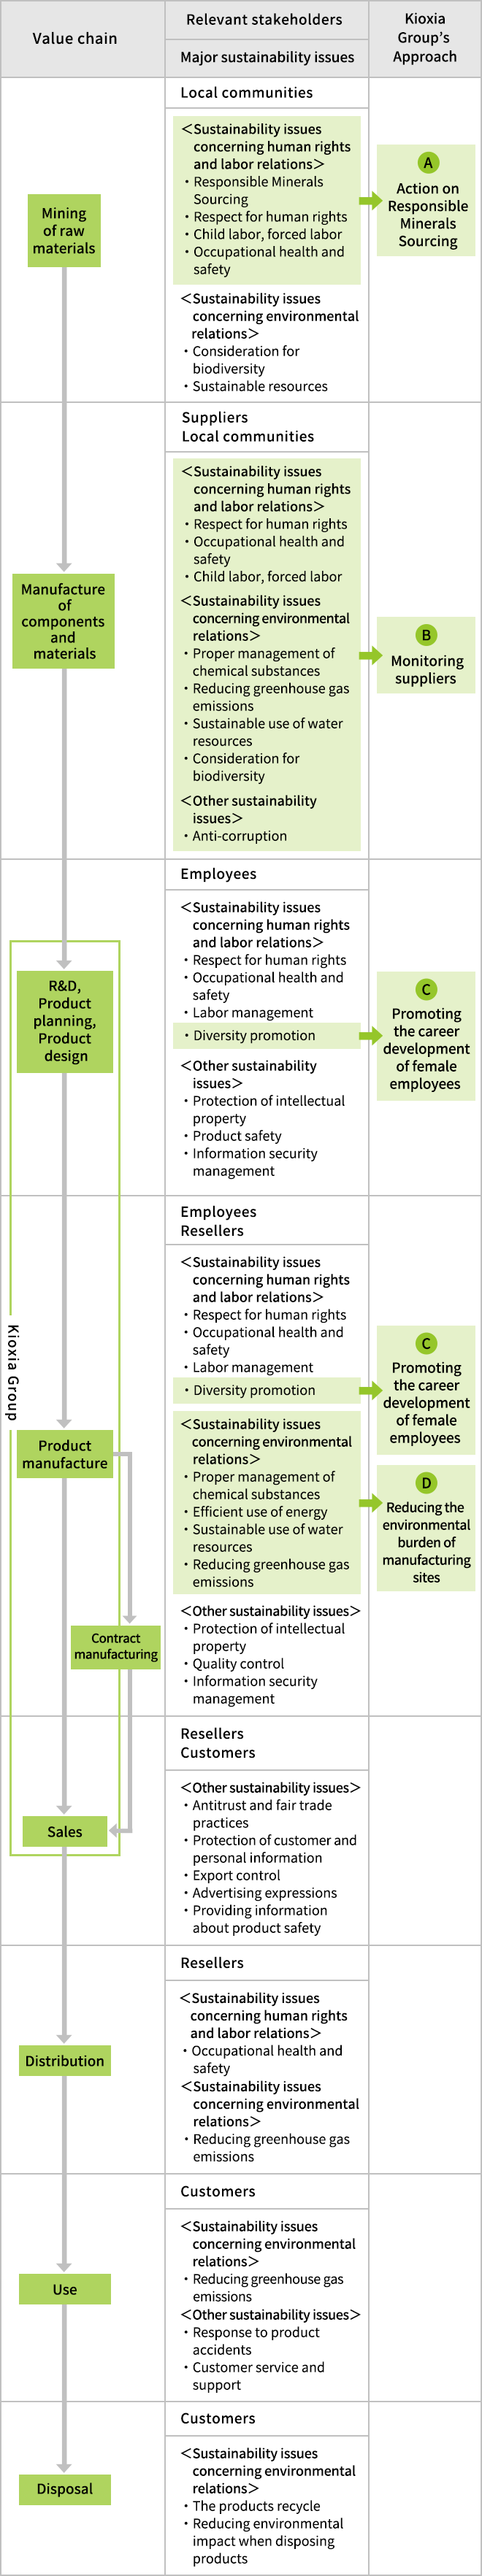 Major Sustainability Issues and Initiatives in the Value Chain